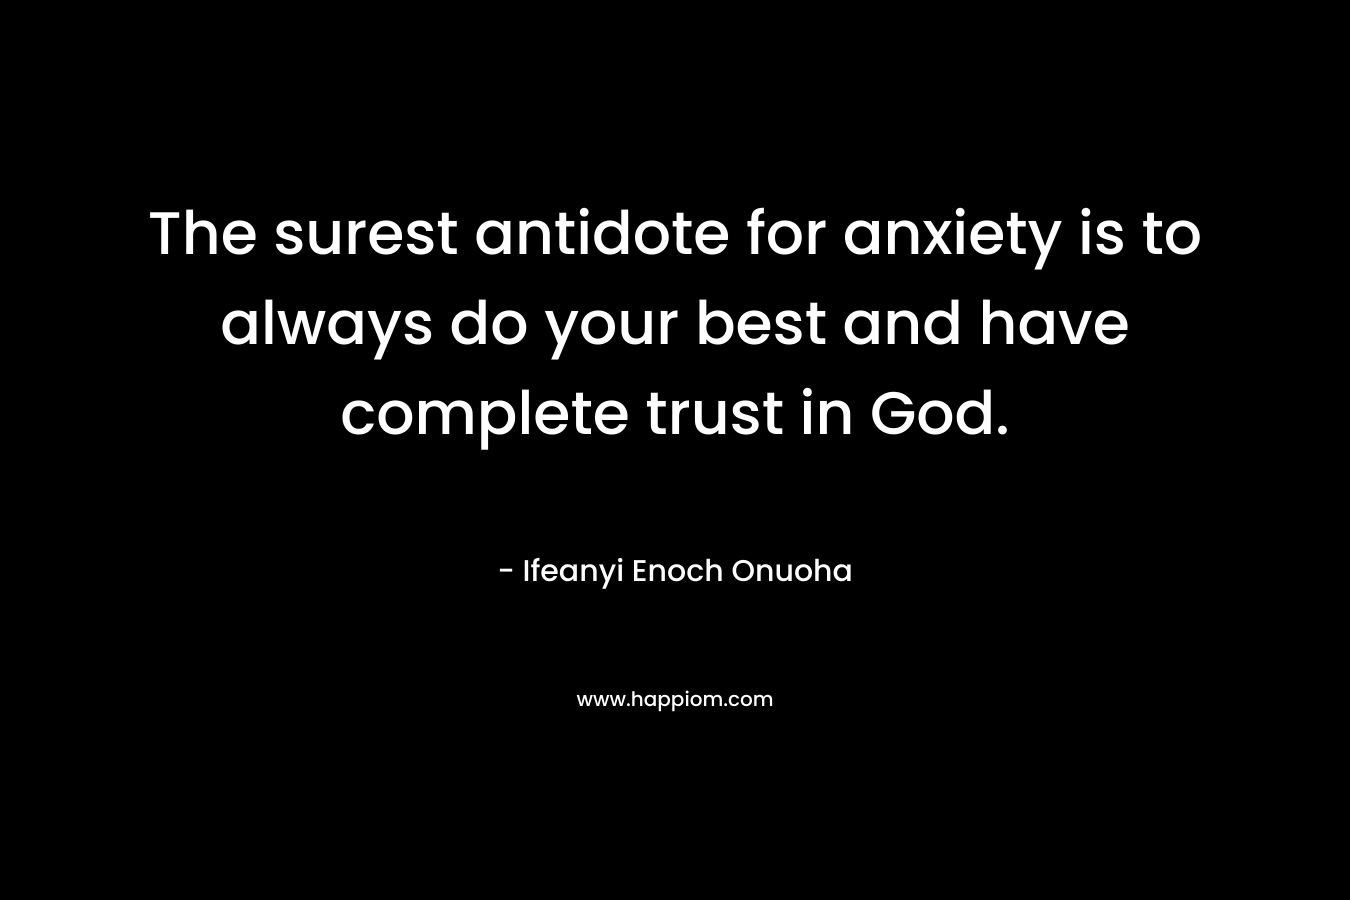 The surest antidote for anxiety is to always do your best and have complete trust in God.